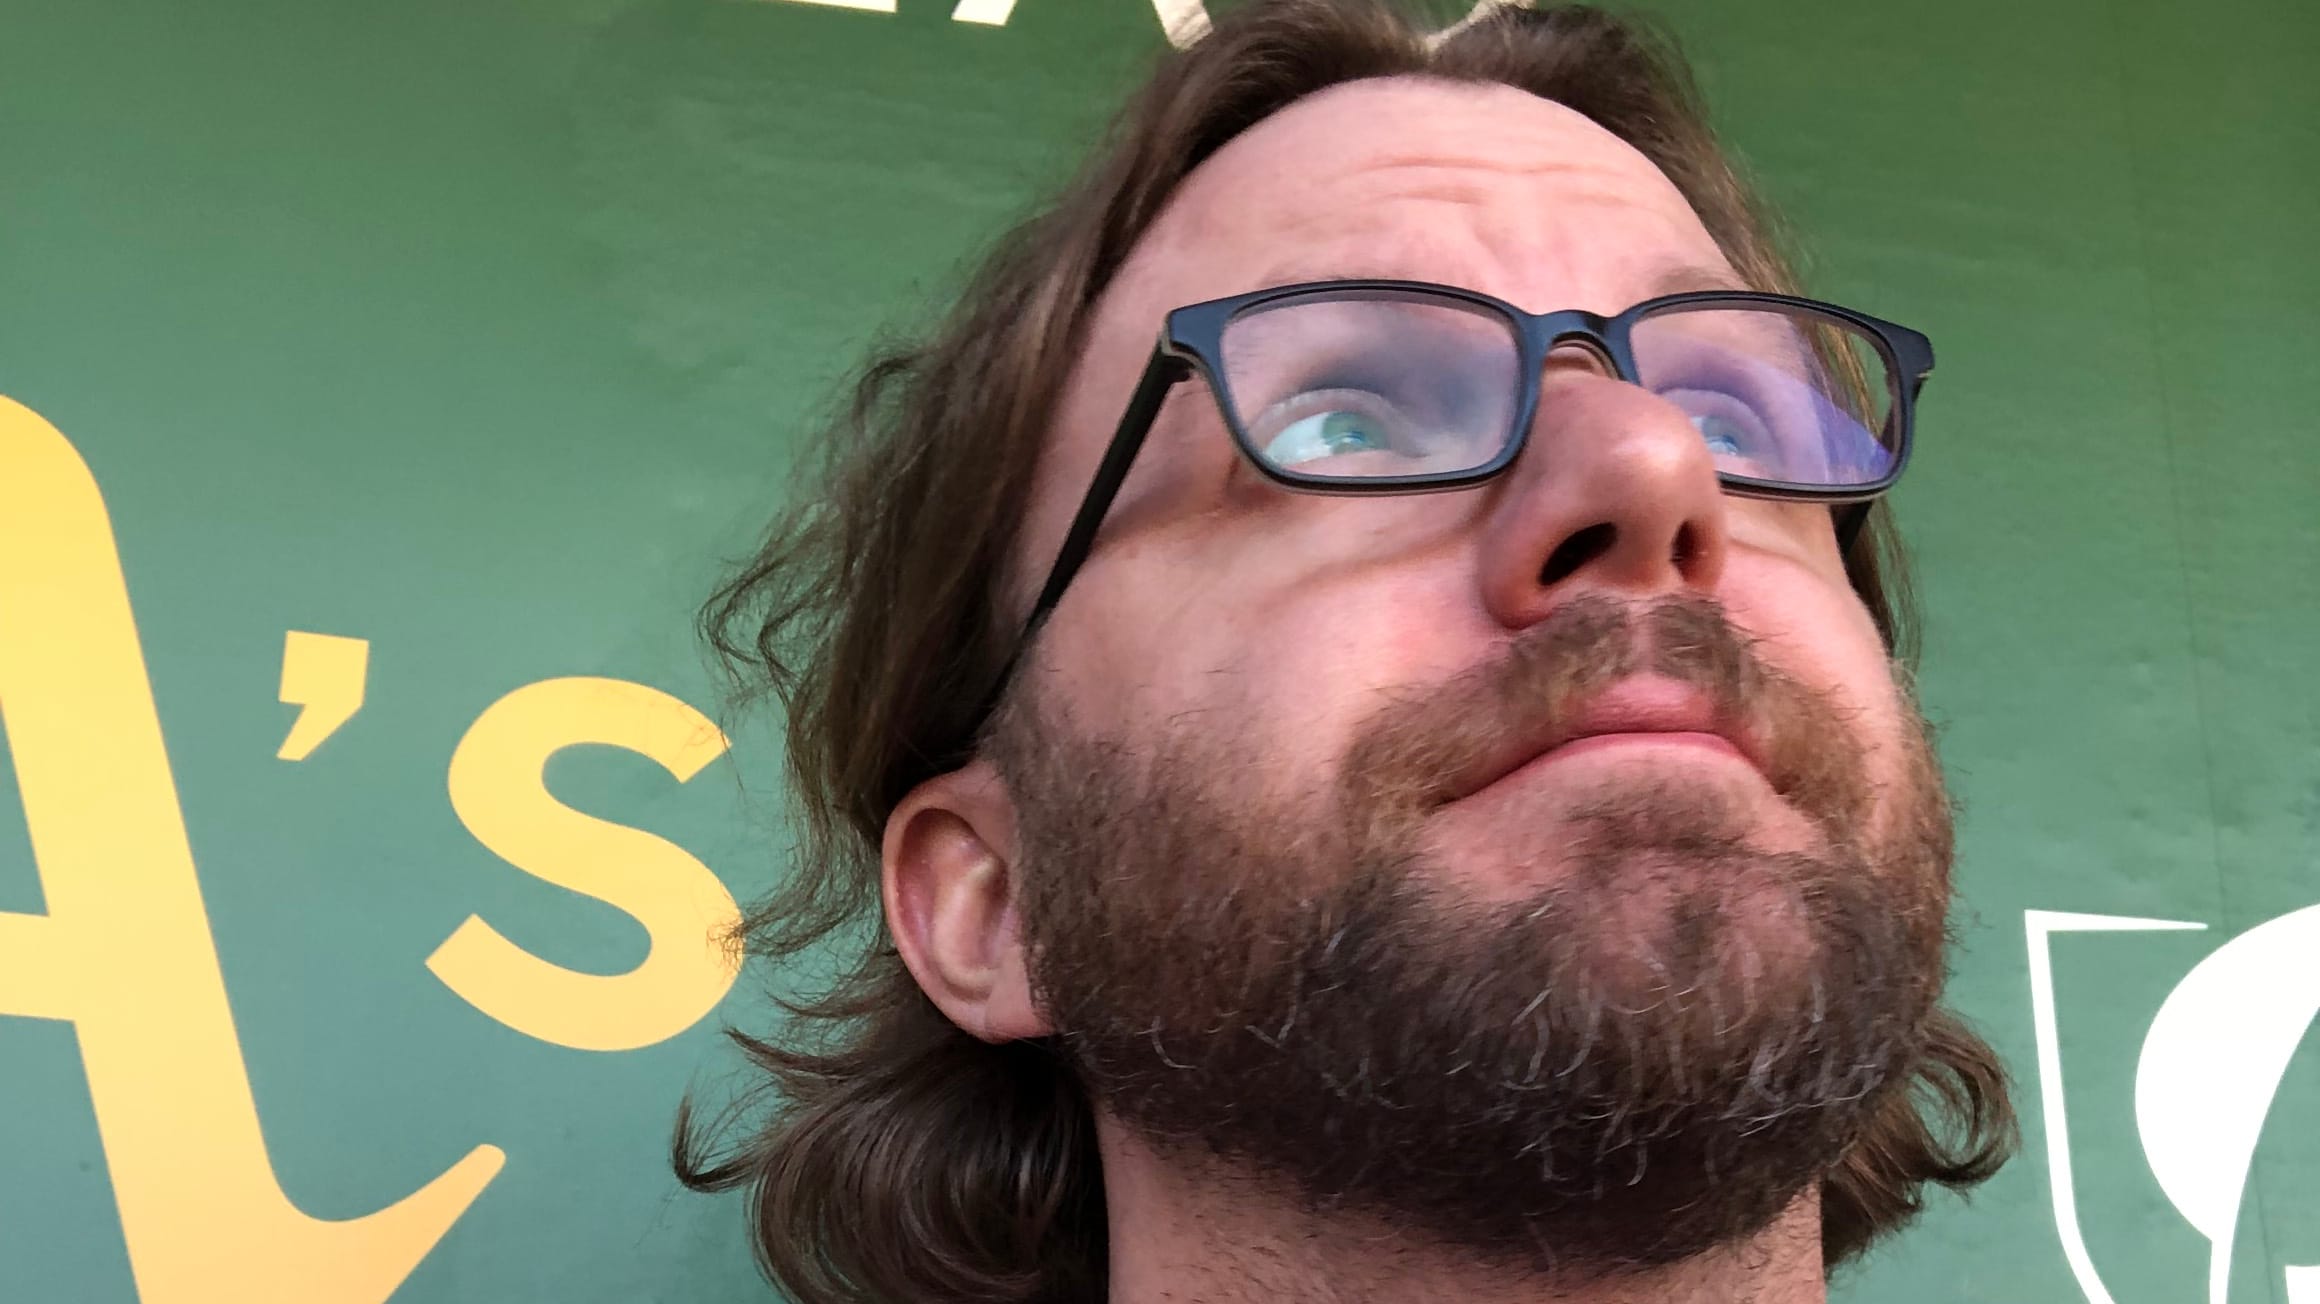 Oakland A's Prospects Shine in Cactus League: Mitch Spence and